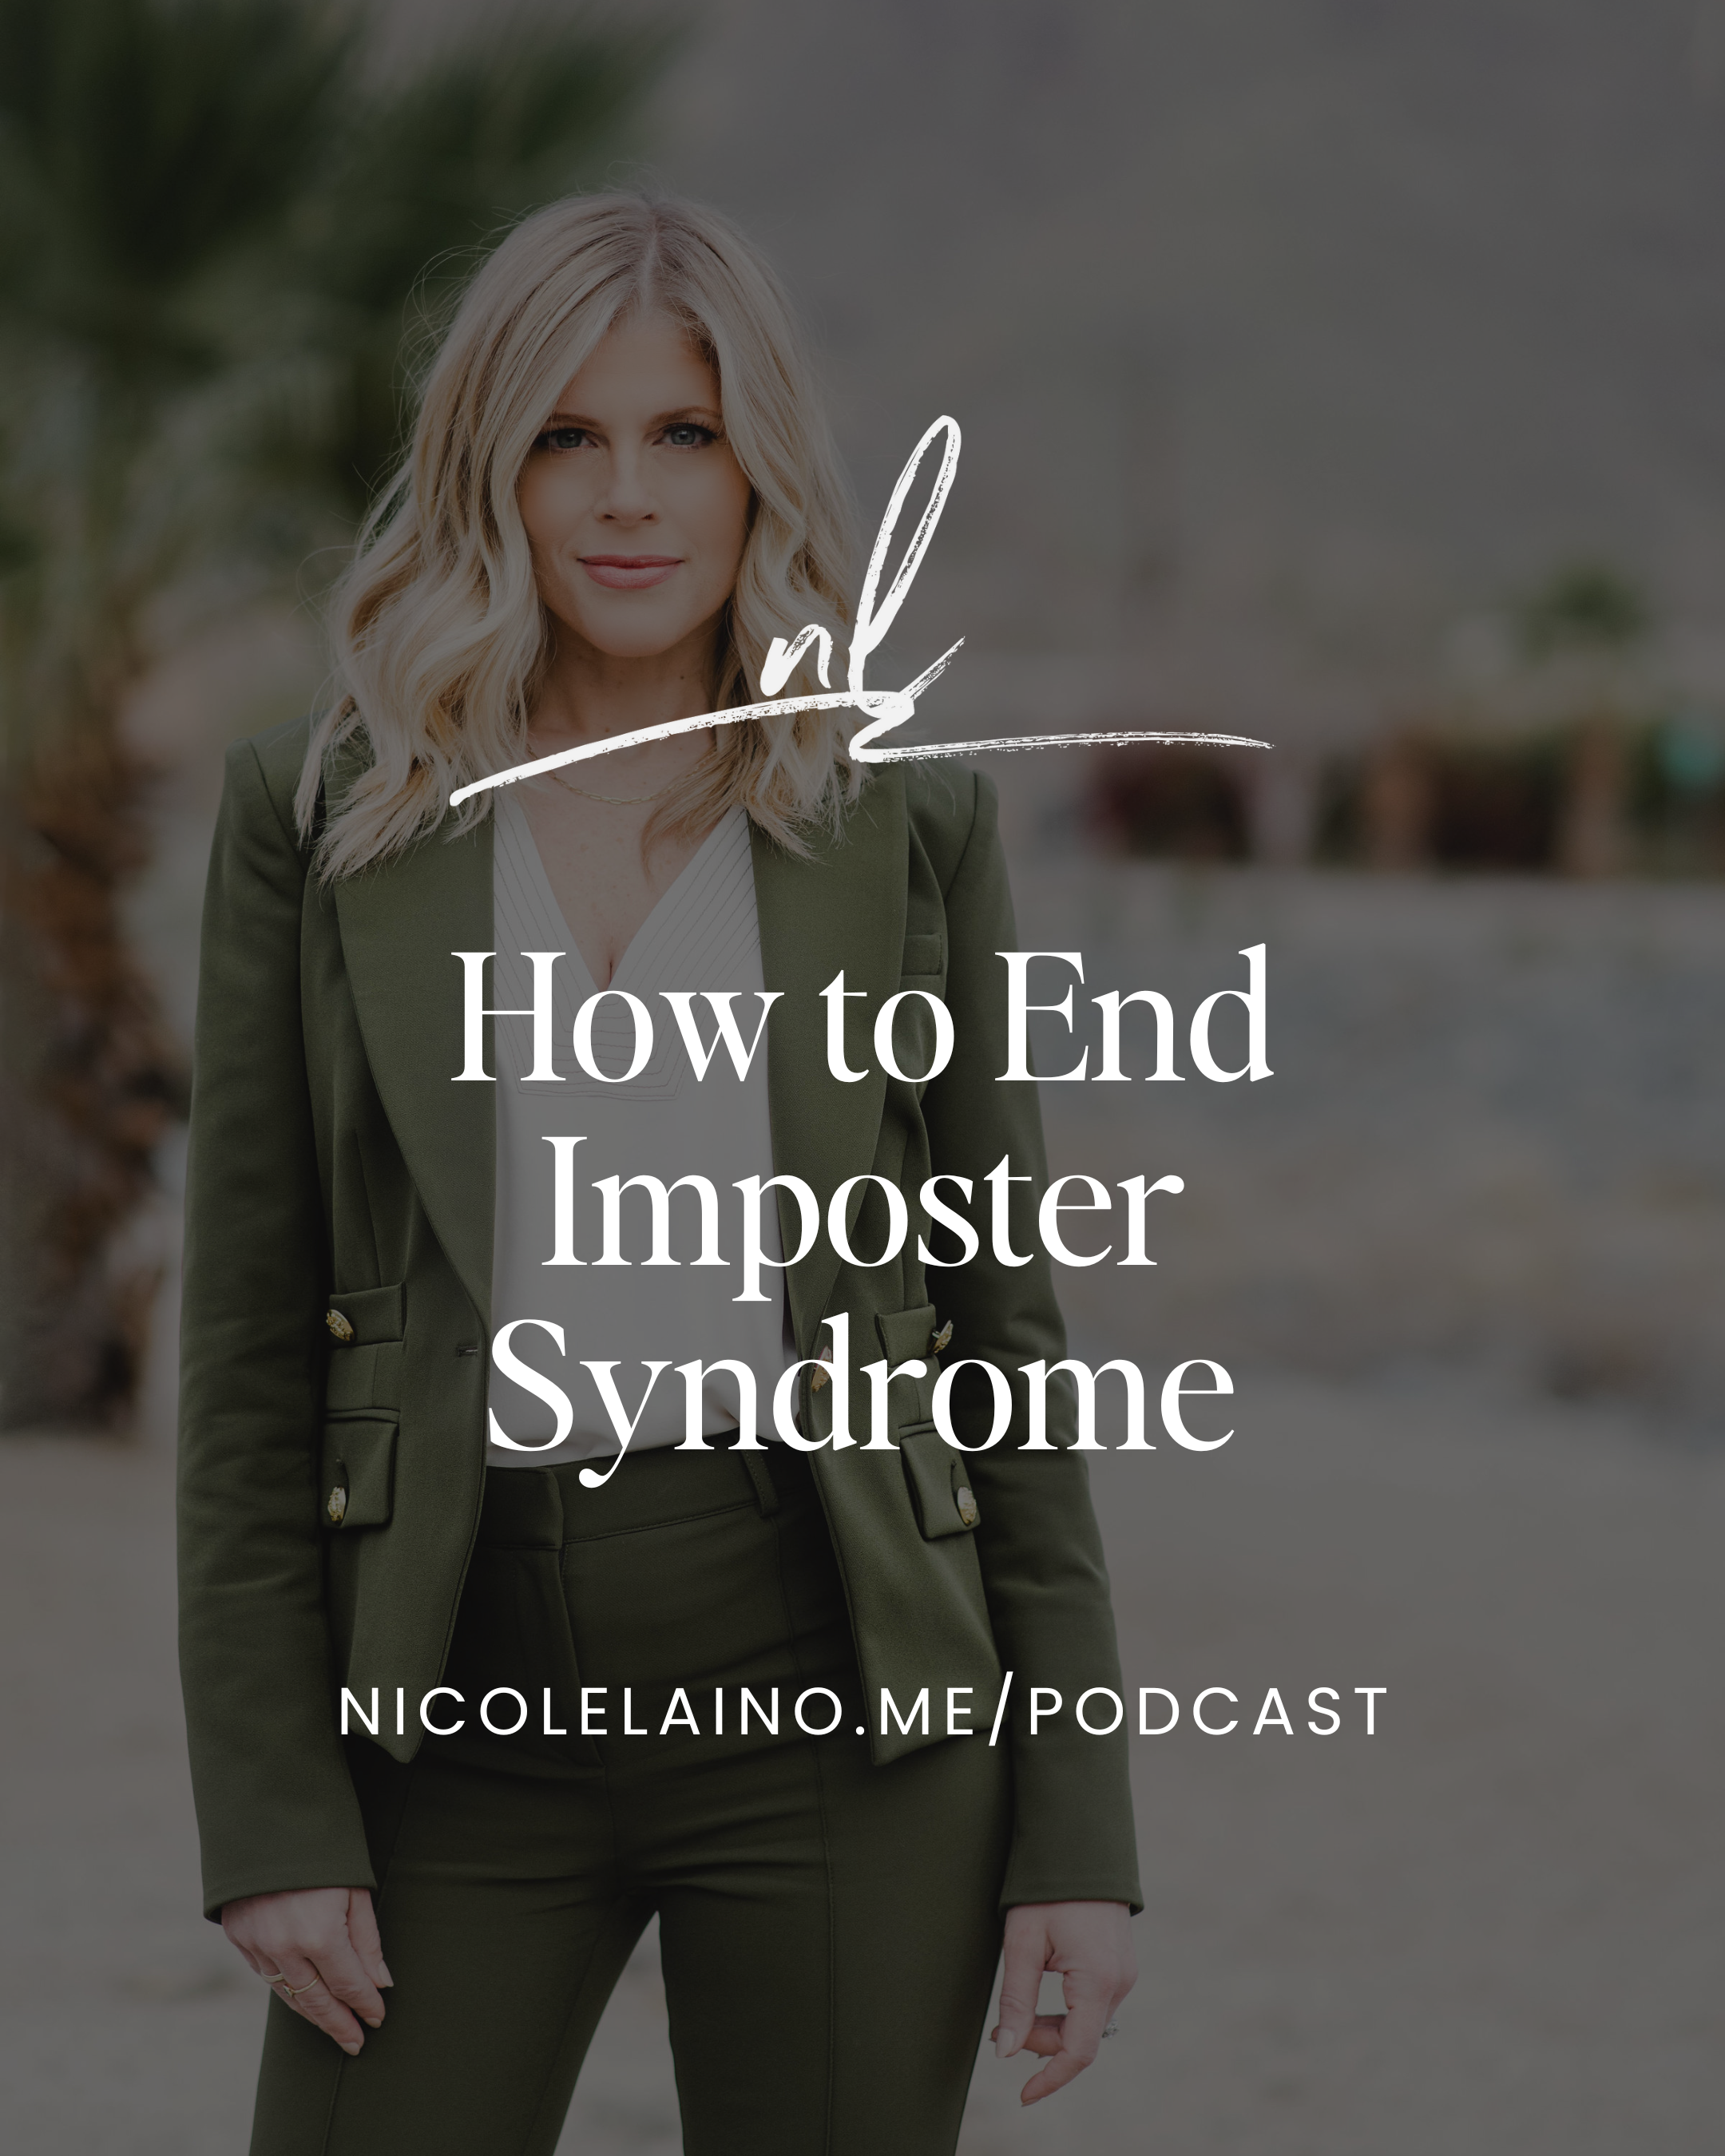 How to End Imposter Syndrome